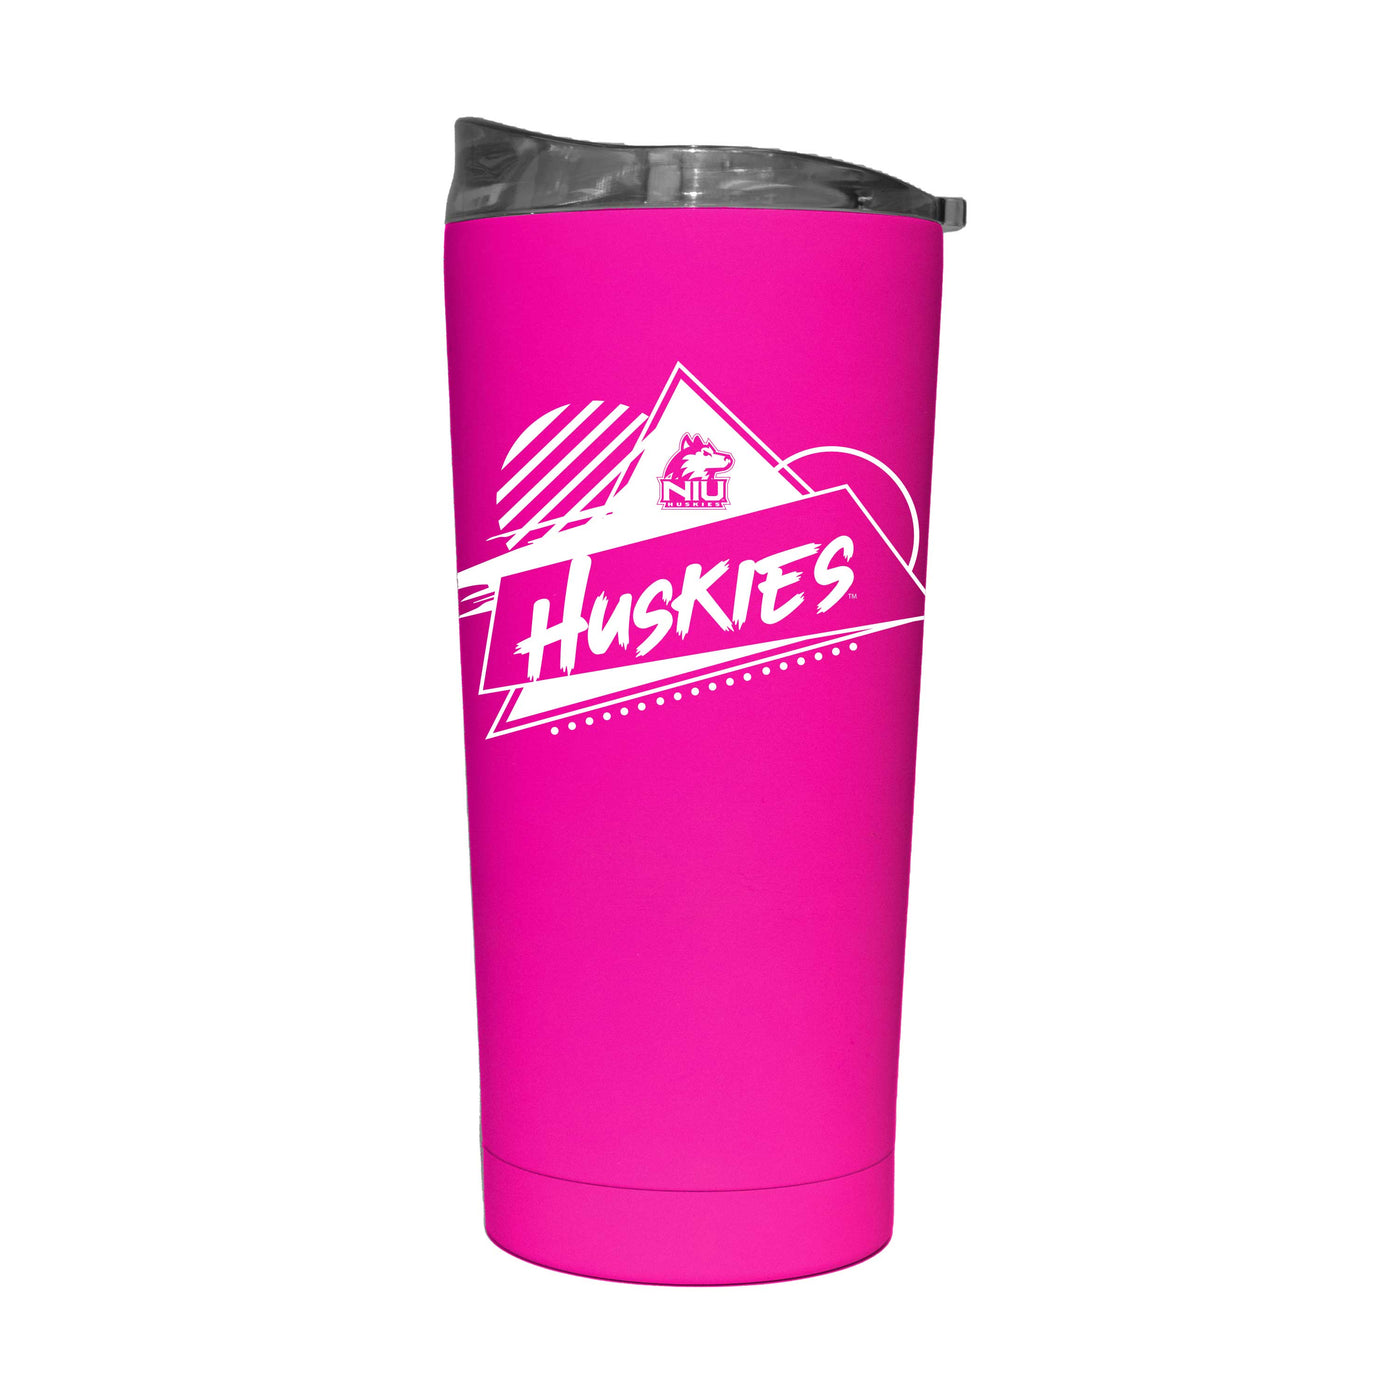 Northern Illinois 20oz Electric Rad Soft Touch Tumbler